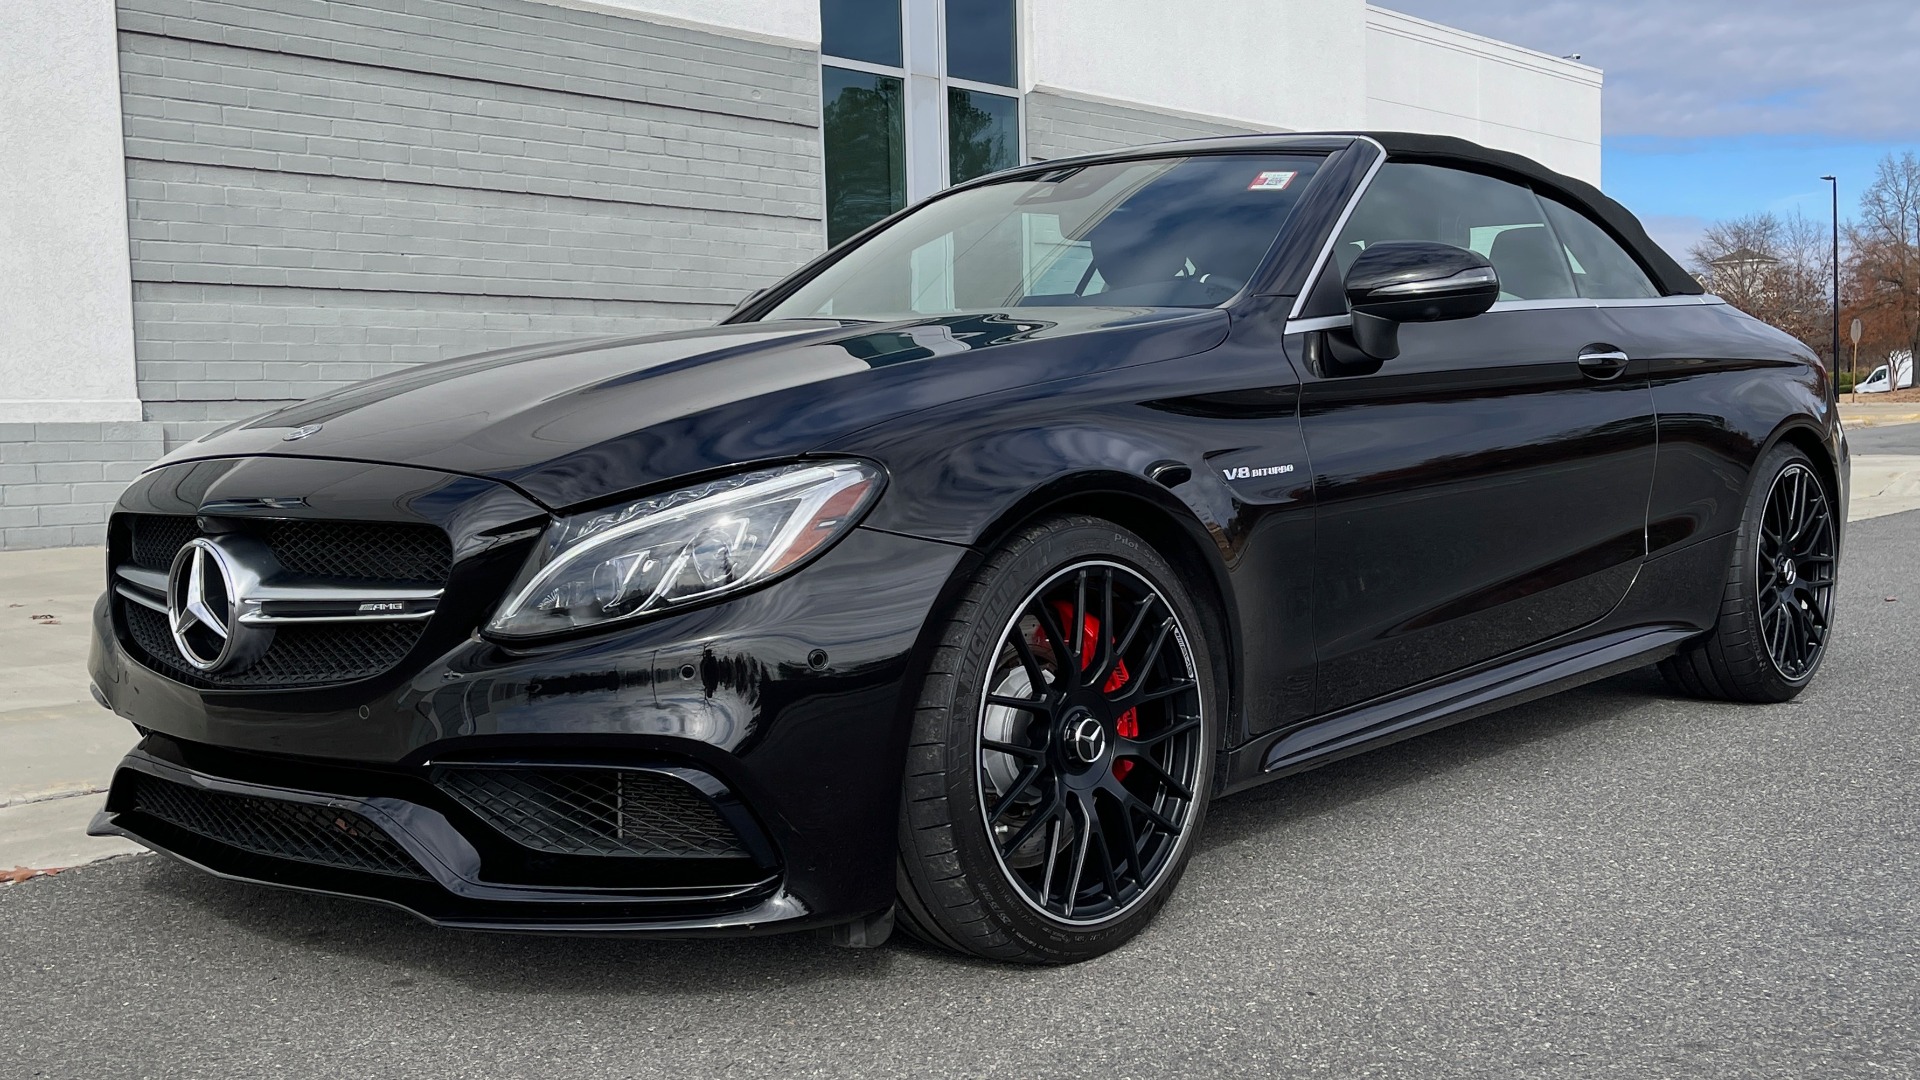 Used 2018 Mercedes-Benz C-CLASS AMG C63 S CABRIOLET / PREM / LIGHTING / MULTIMEDIA / NIGHT PKG for sale $84,000 at Formula Imports in Charlotte NC 28227 3